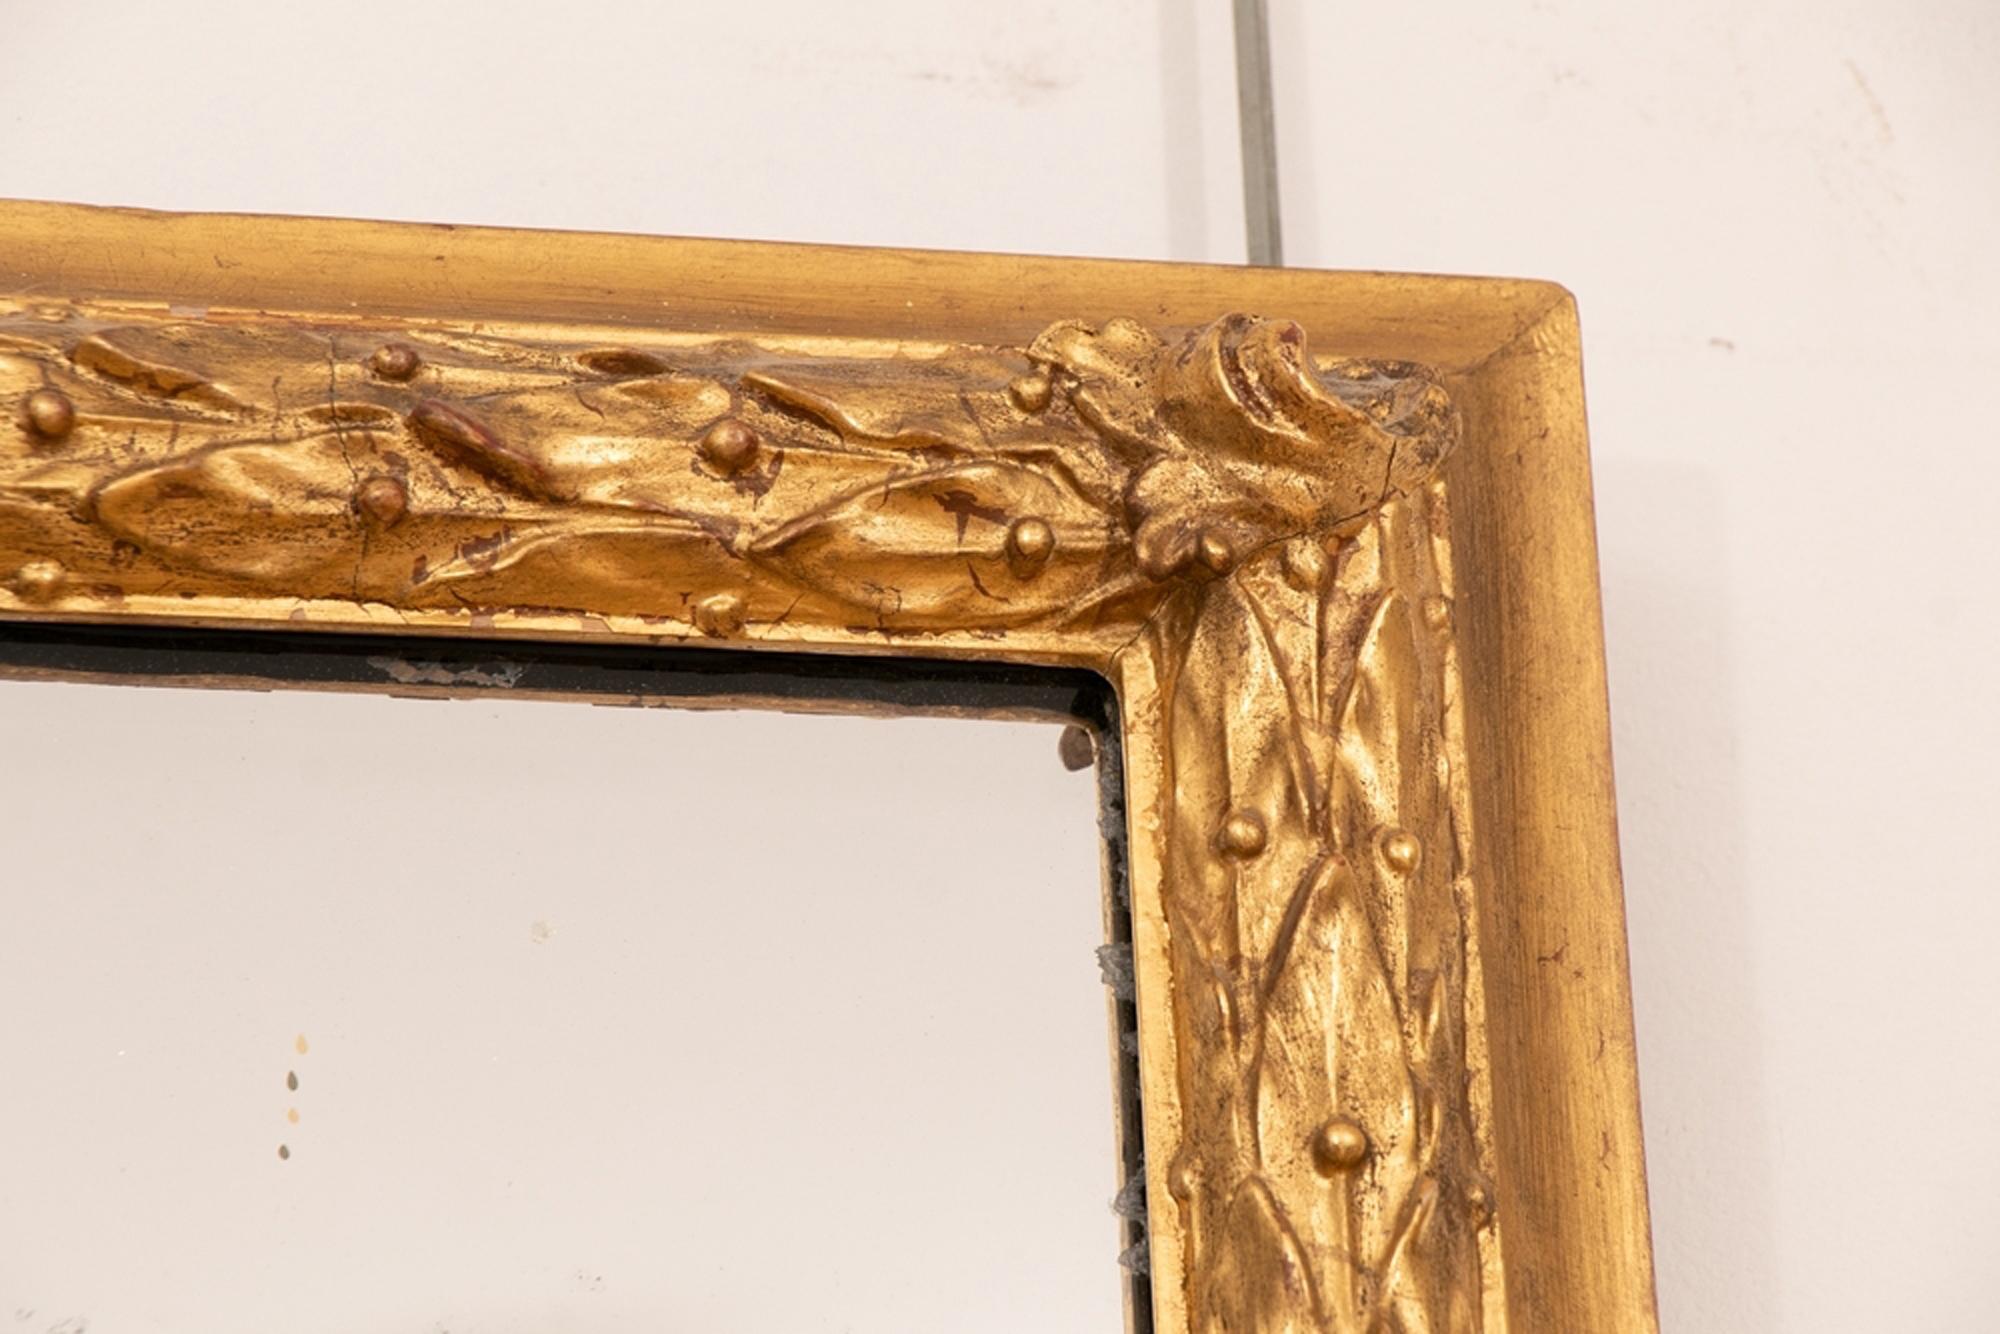 English antique giltwood overmantel mirror, circa 1860. Superb quality 23.5-carat genuine gold leaf water gilding. Original mirror plate with overall foxing, original backing boards. A Victorian mirror fully restored and touch gilded where necessary